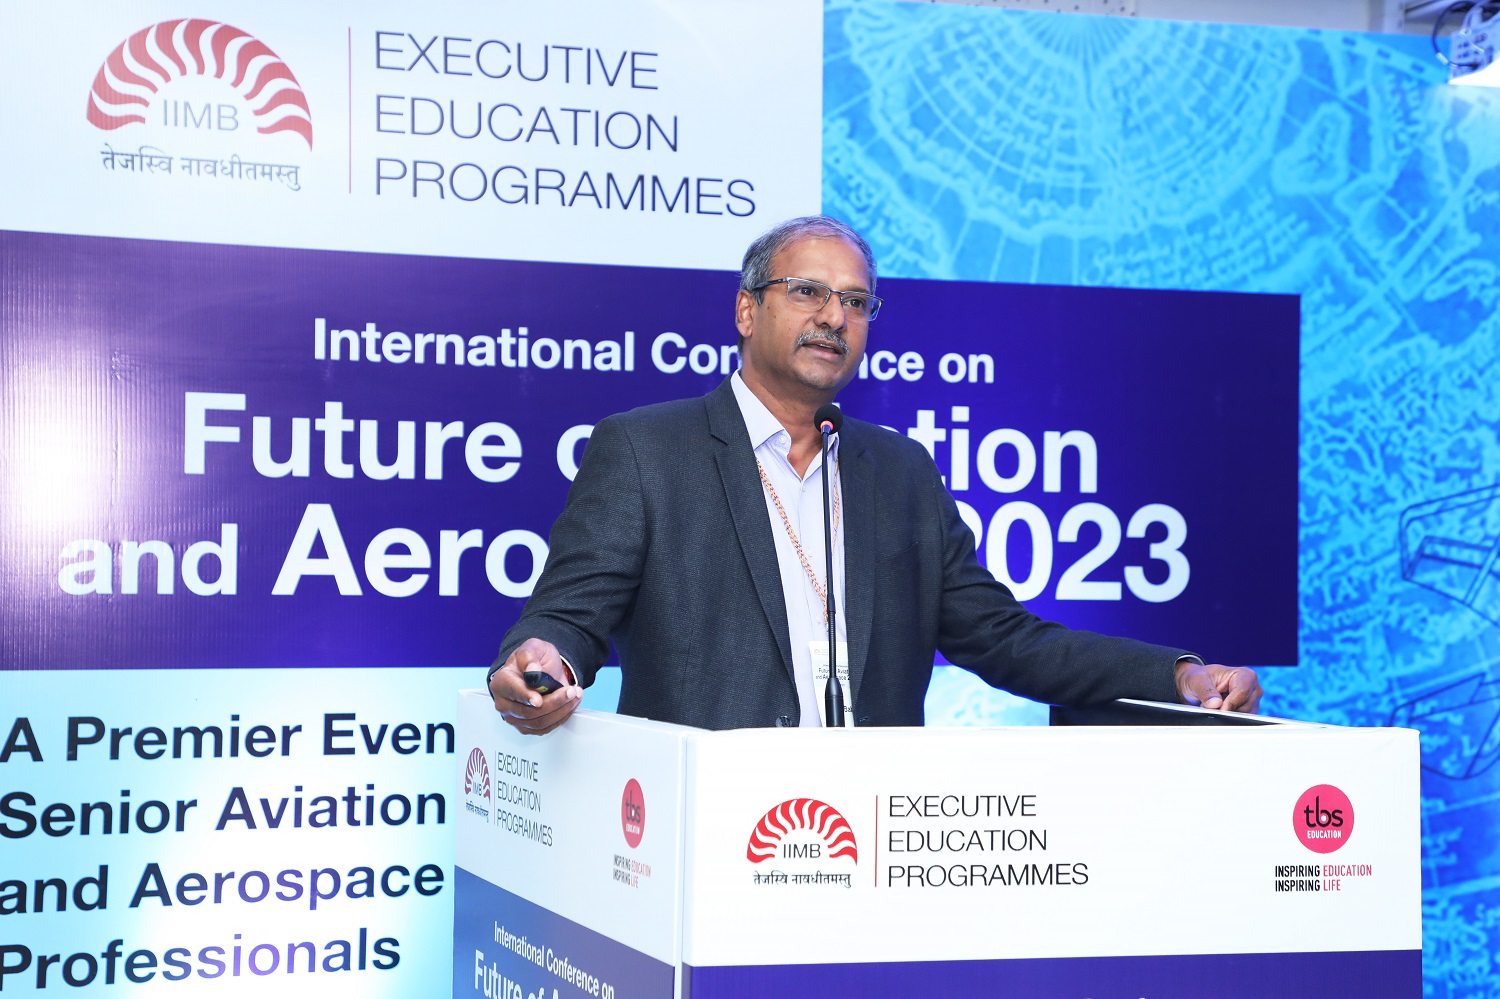 Mr. U Raja Babu, Outstanding Scientist and Director, Research Centre Imarat, spoke on 'Future of Supply Chain in Aviation and Aerospace'. Mr. Chandra Shekhar Y, Sr. Director - Global Sourcing Strategy, GE Aviation, spoke on 'Future of Supply Chain in Aviation and Aerospace'.